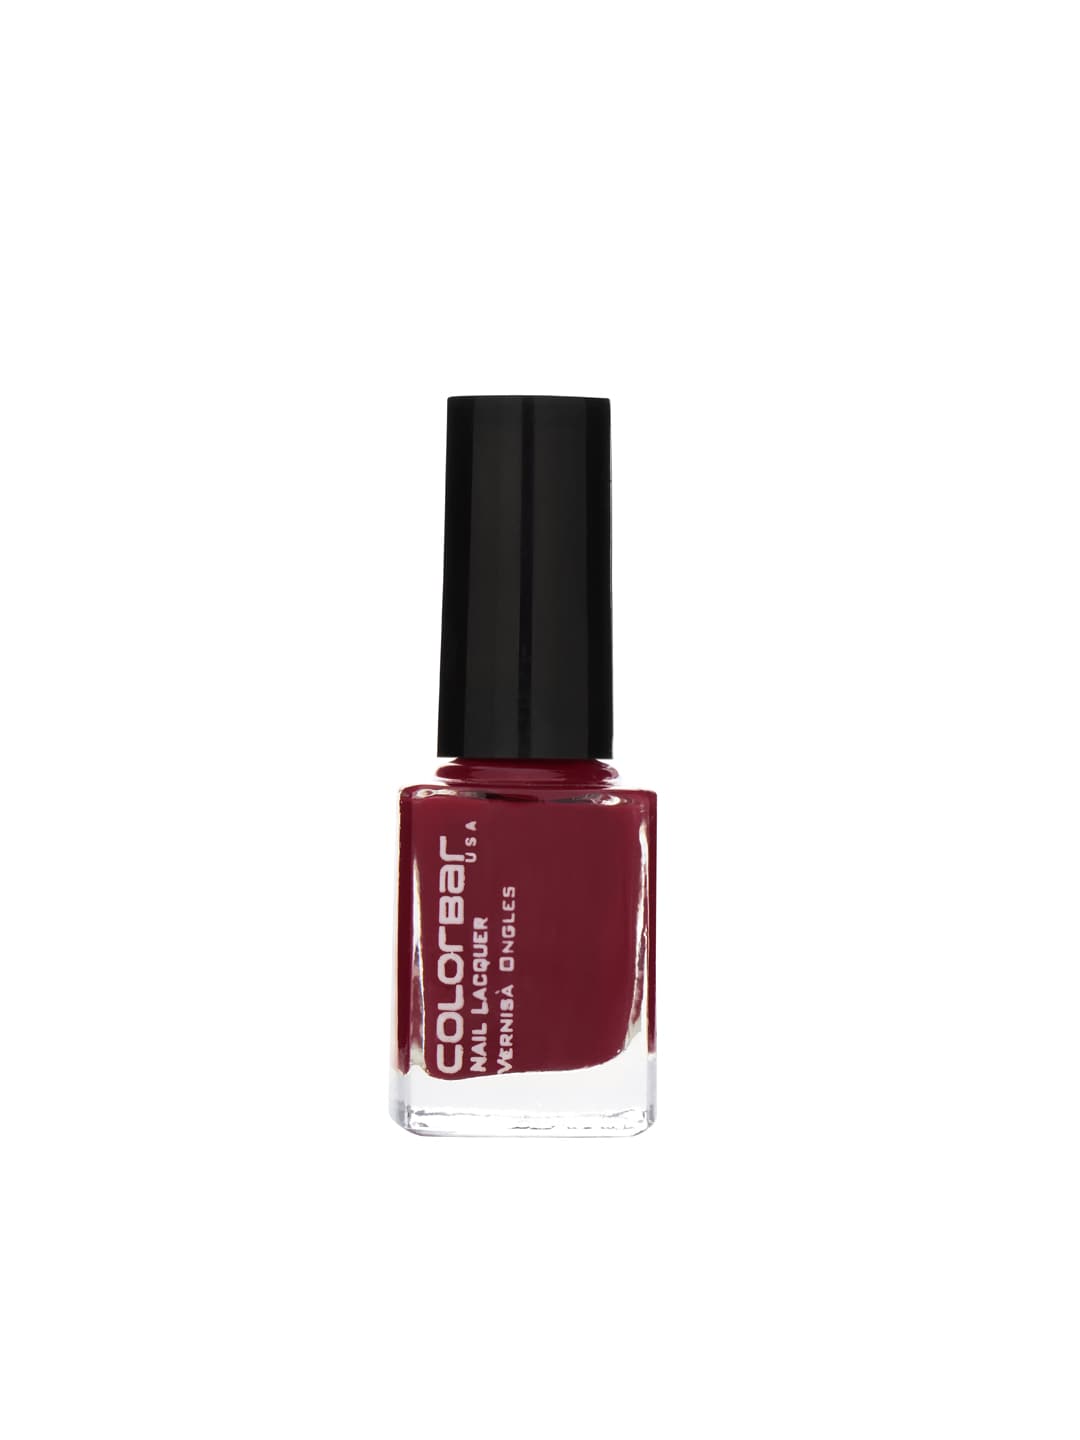 Colorbar Fire Nail Lacquer 07